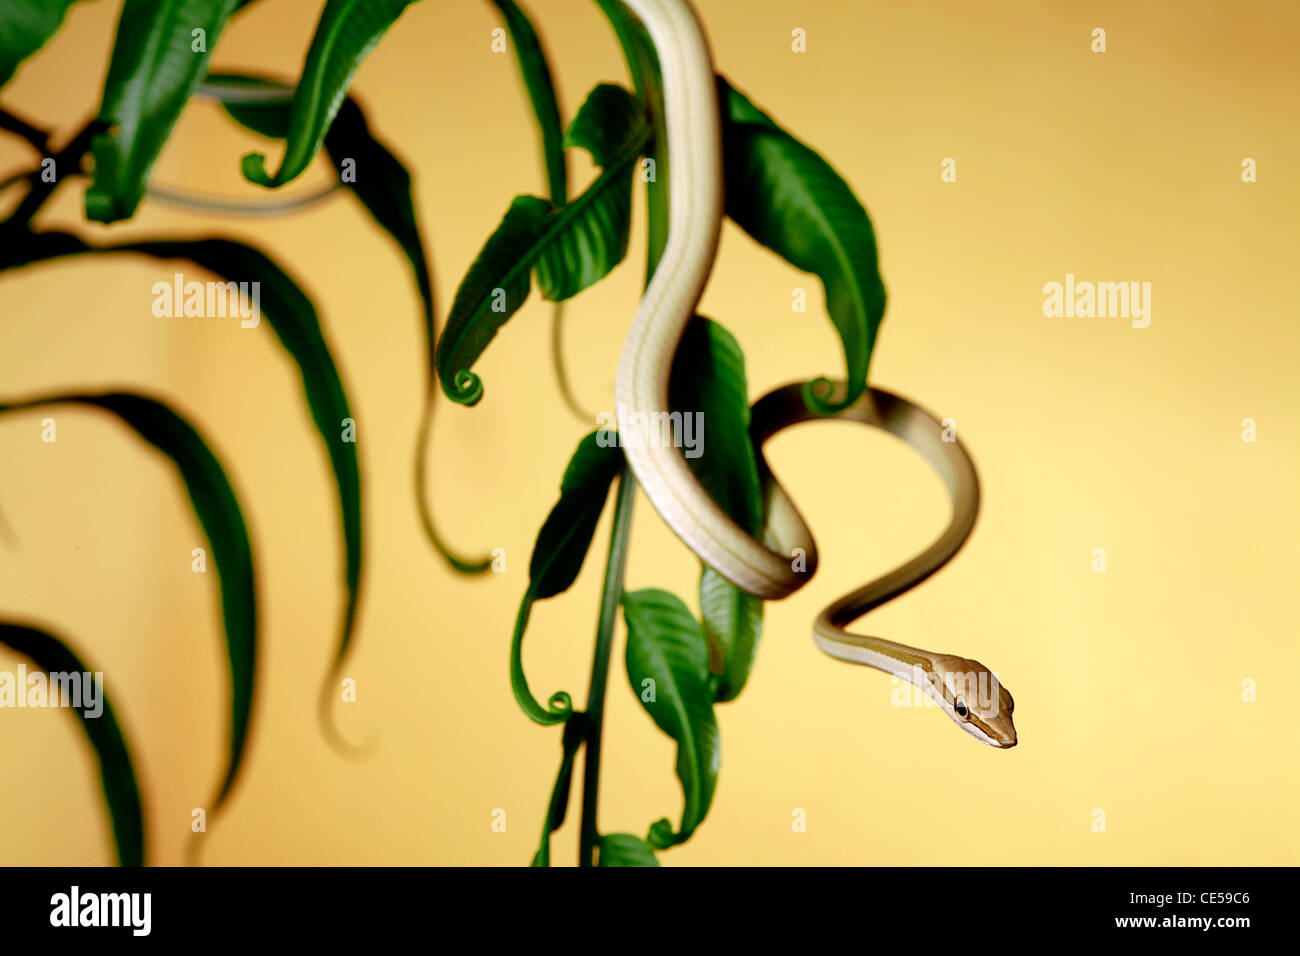 tree snake hangging down from a fern Stock Photo